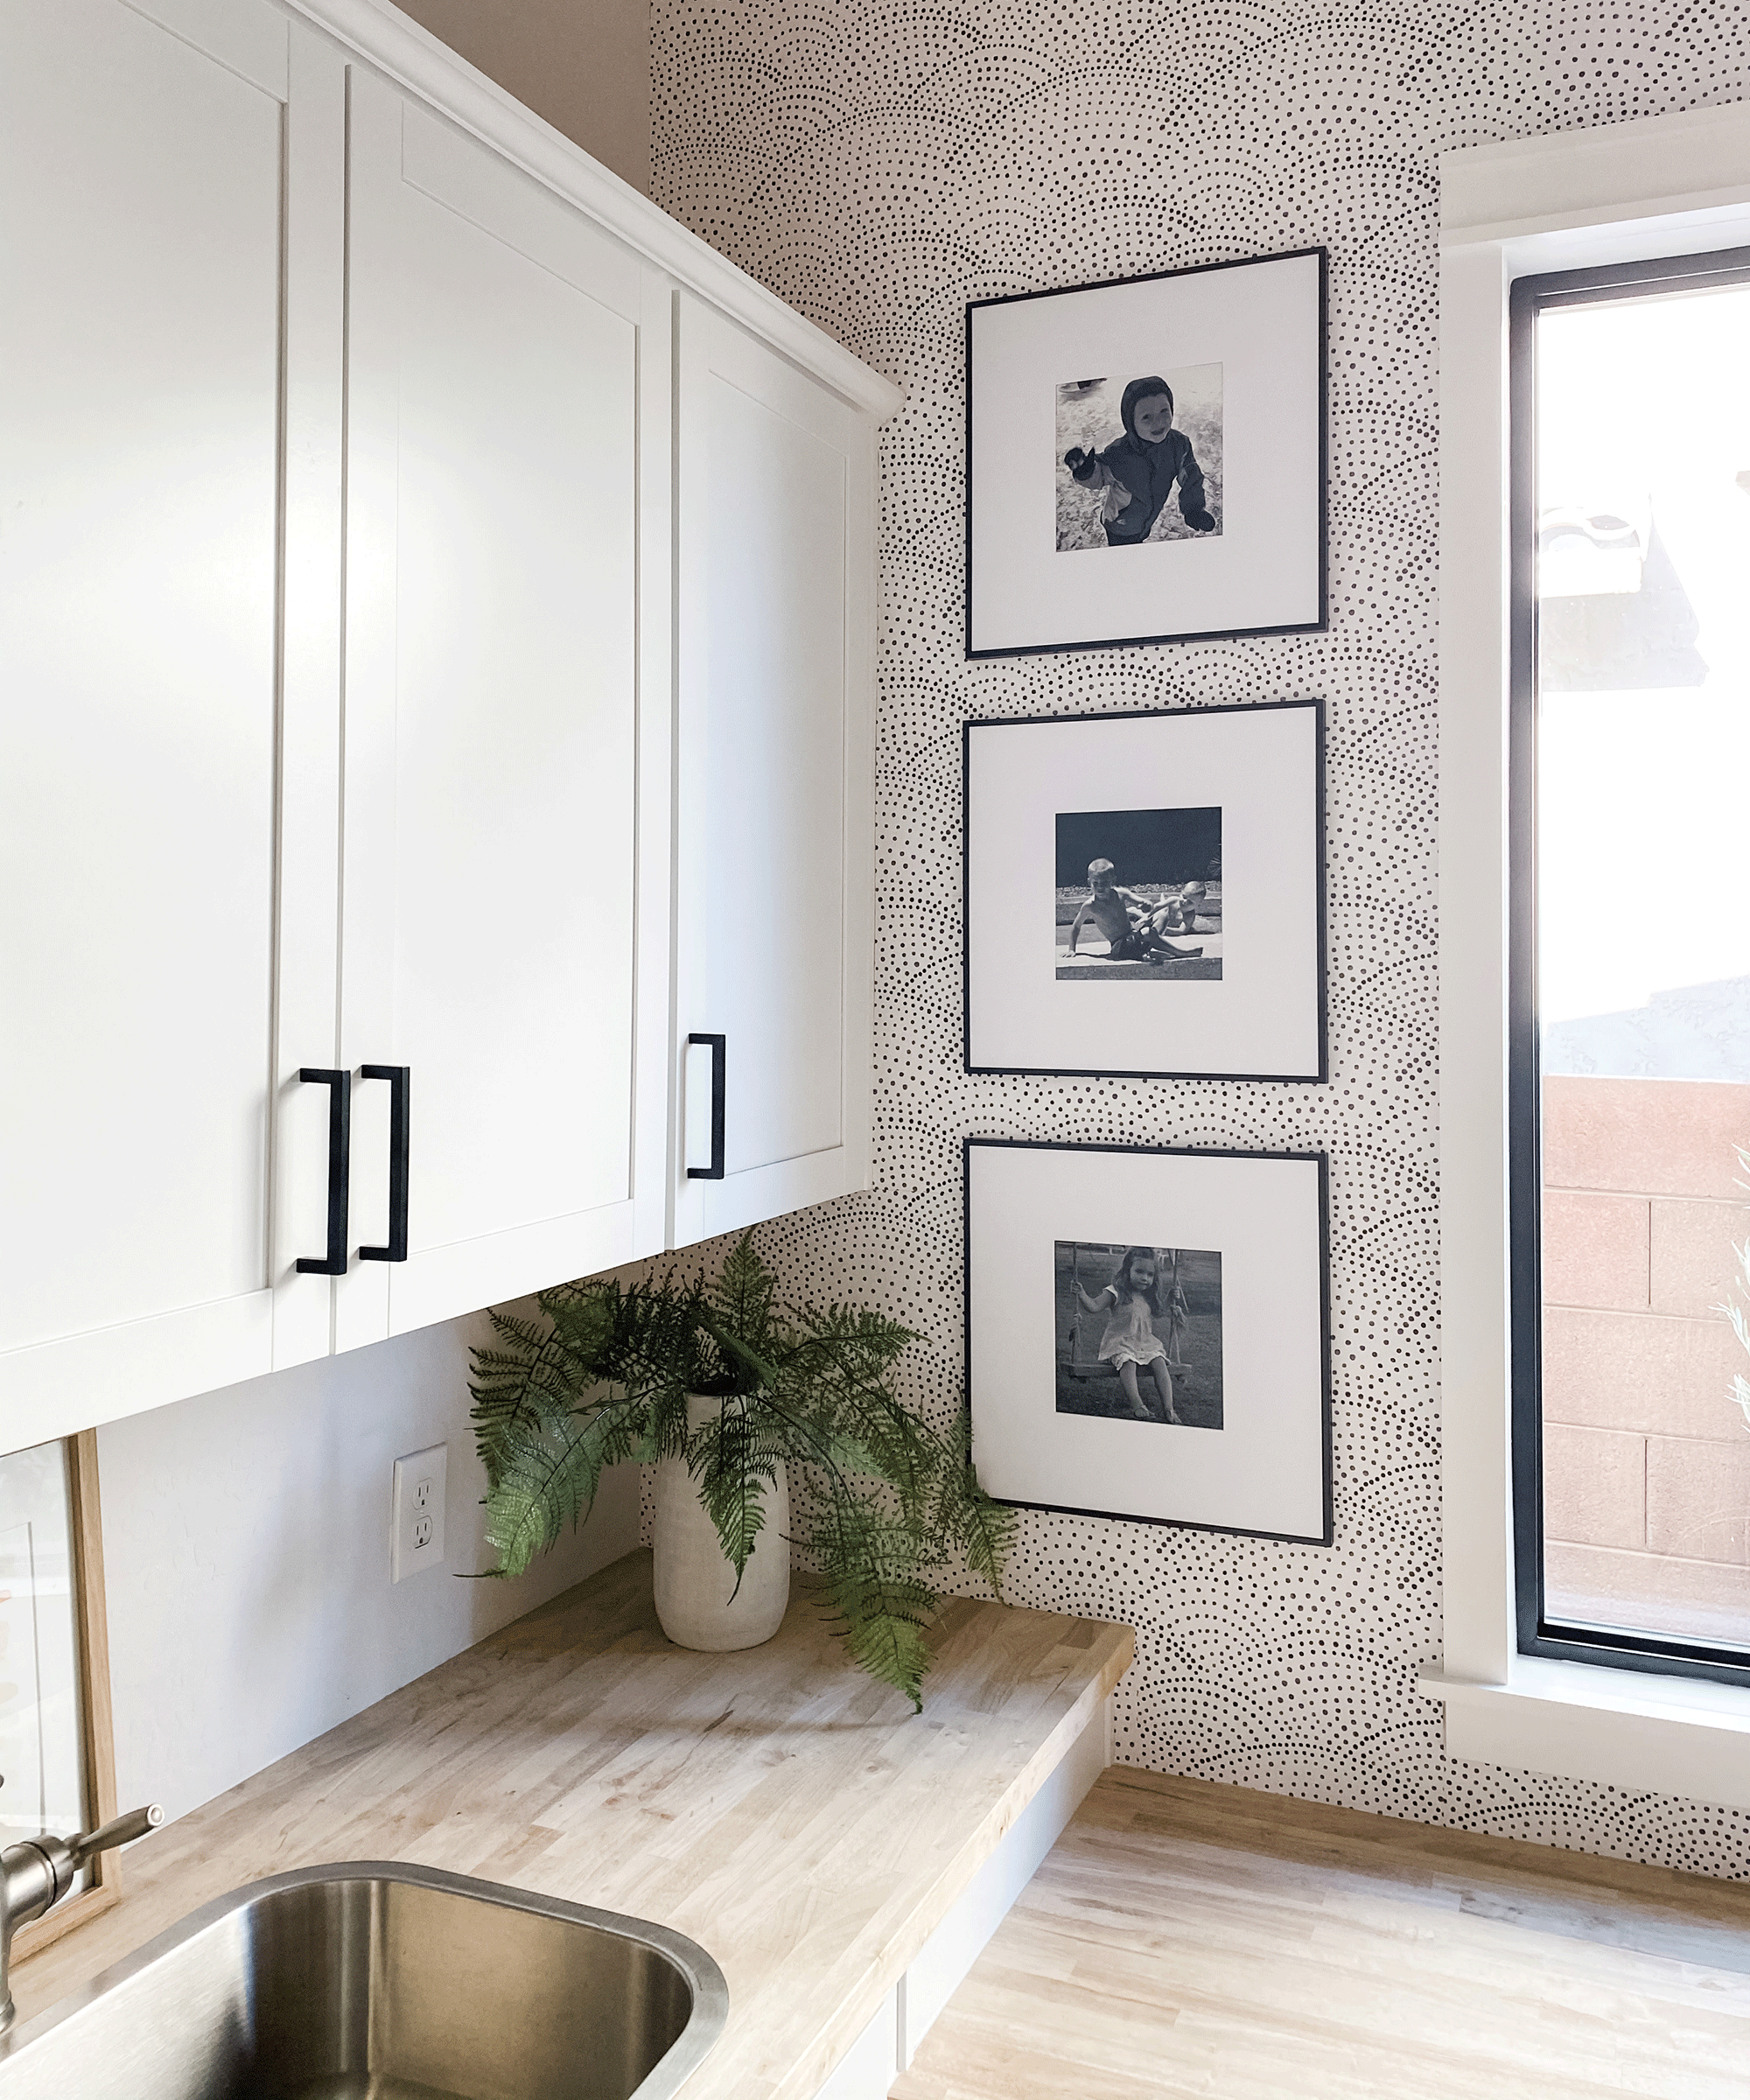 A kitchen with white cupboard decor, metal sink, wooden-effect worktops, trio of black and white framed wall art and monochrome spotted wallpaper with houseplant in corner